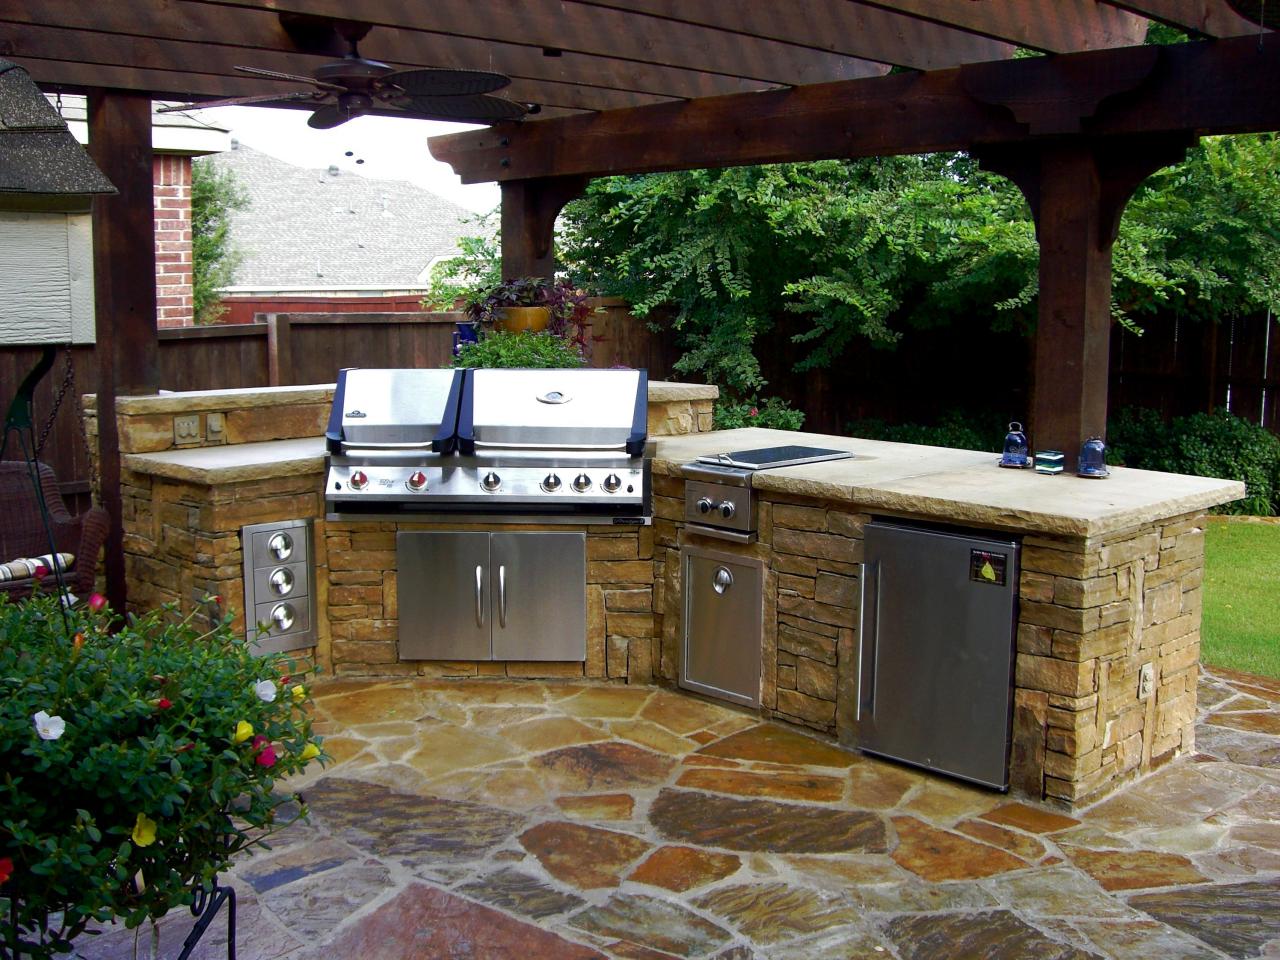 Transform your backyard into the ultimate outdoor kitchen. 🔥 With the